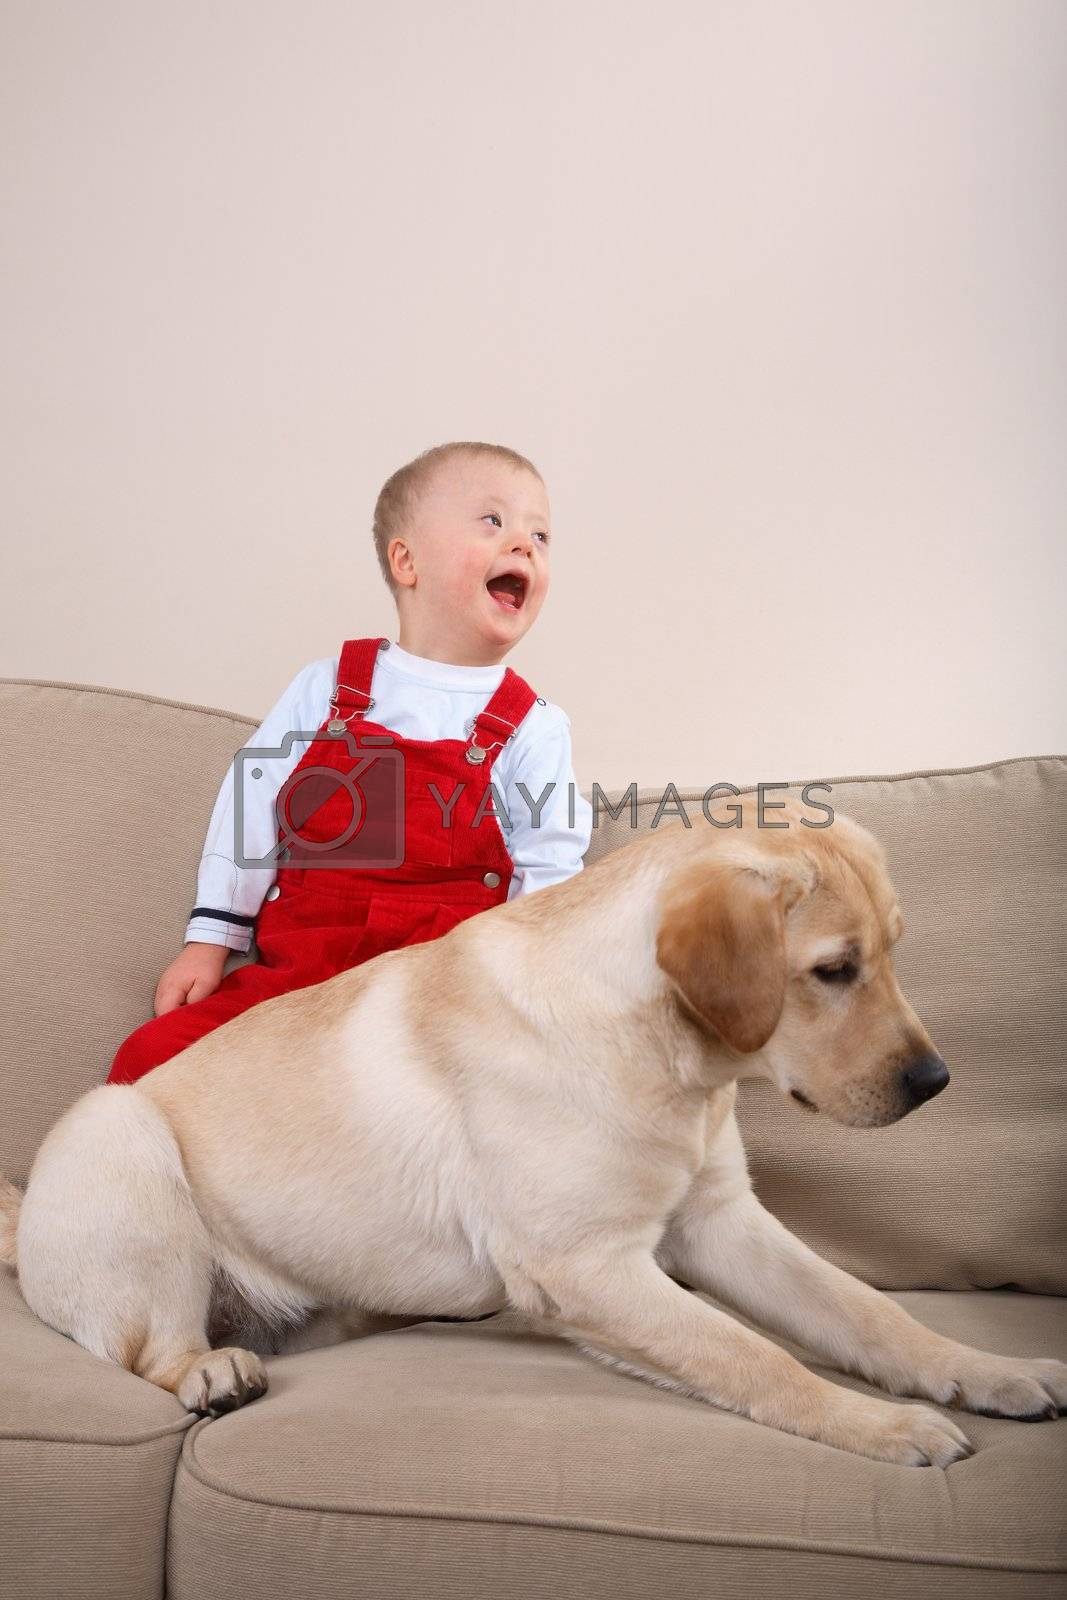 Royalty free image of Dog Therapy by linea